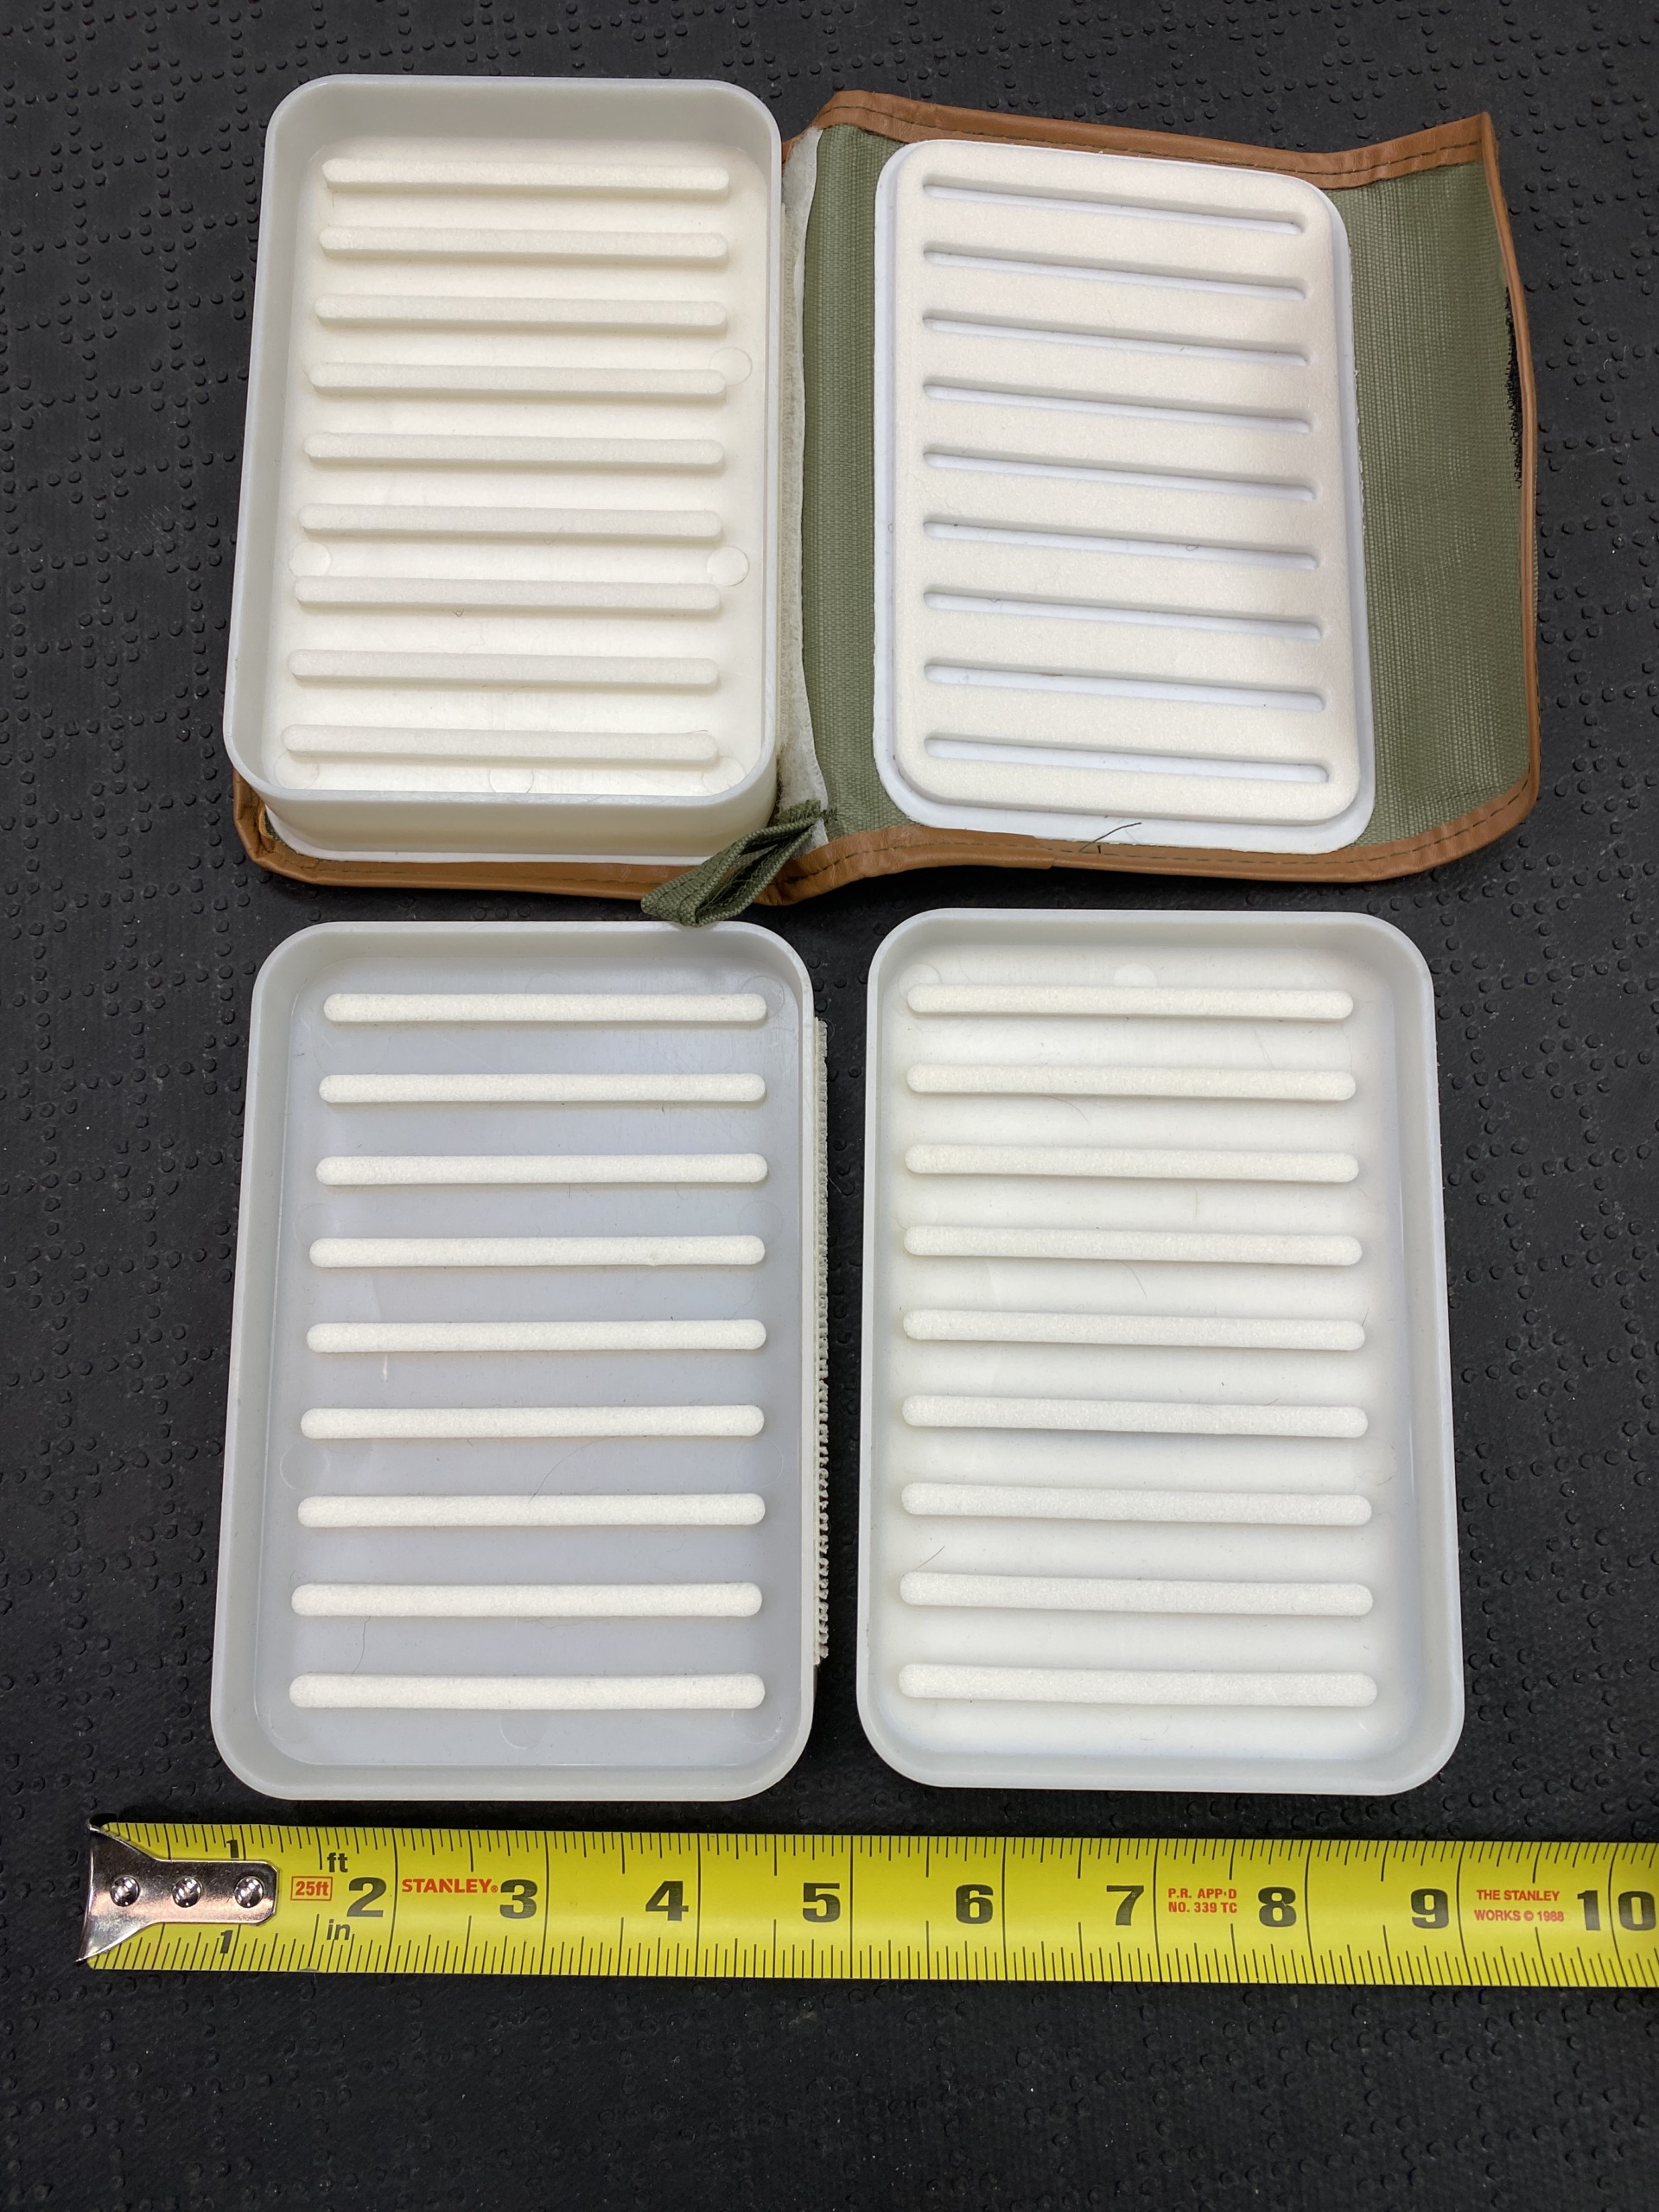 SOLD! – Vintage Orvis Soft Fly Box – C/W Two Inserts – GREAT SHAPE